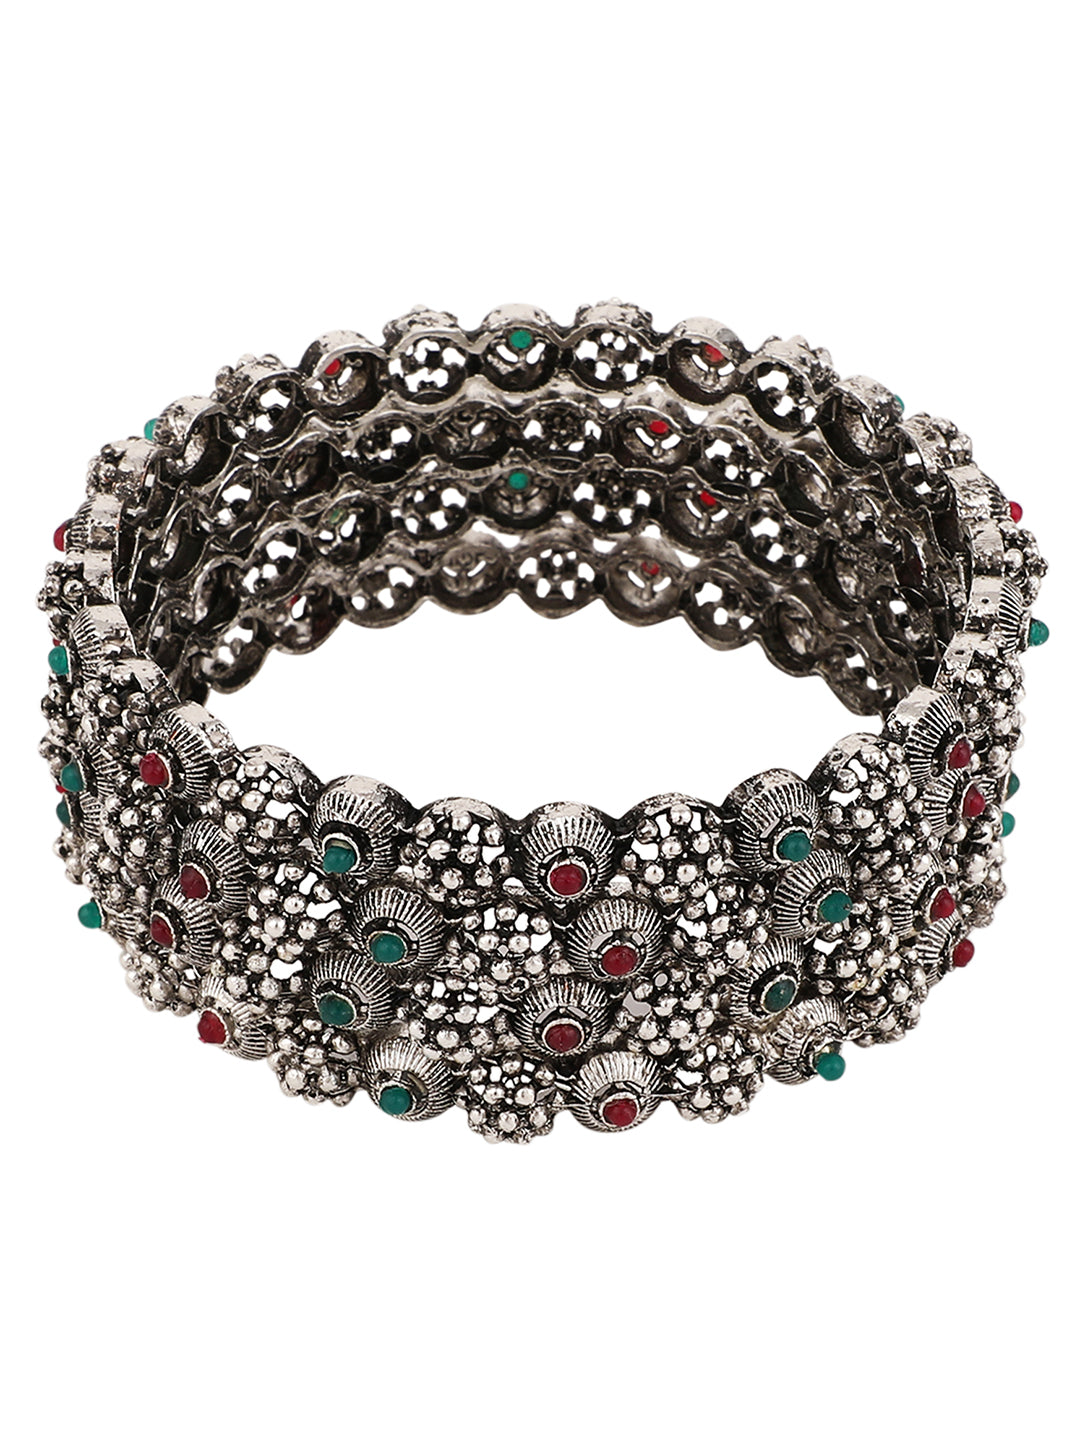 Women's Set Of 4 Oxidised Silver-Plated Pink Ruby and Green Stone Studded Handcrafted Bangles - Anikas Creation